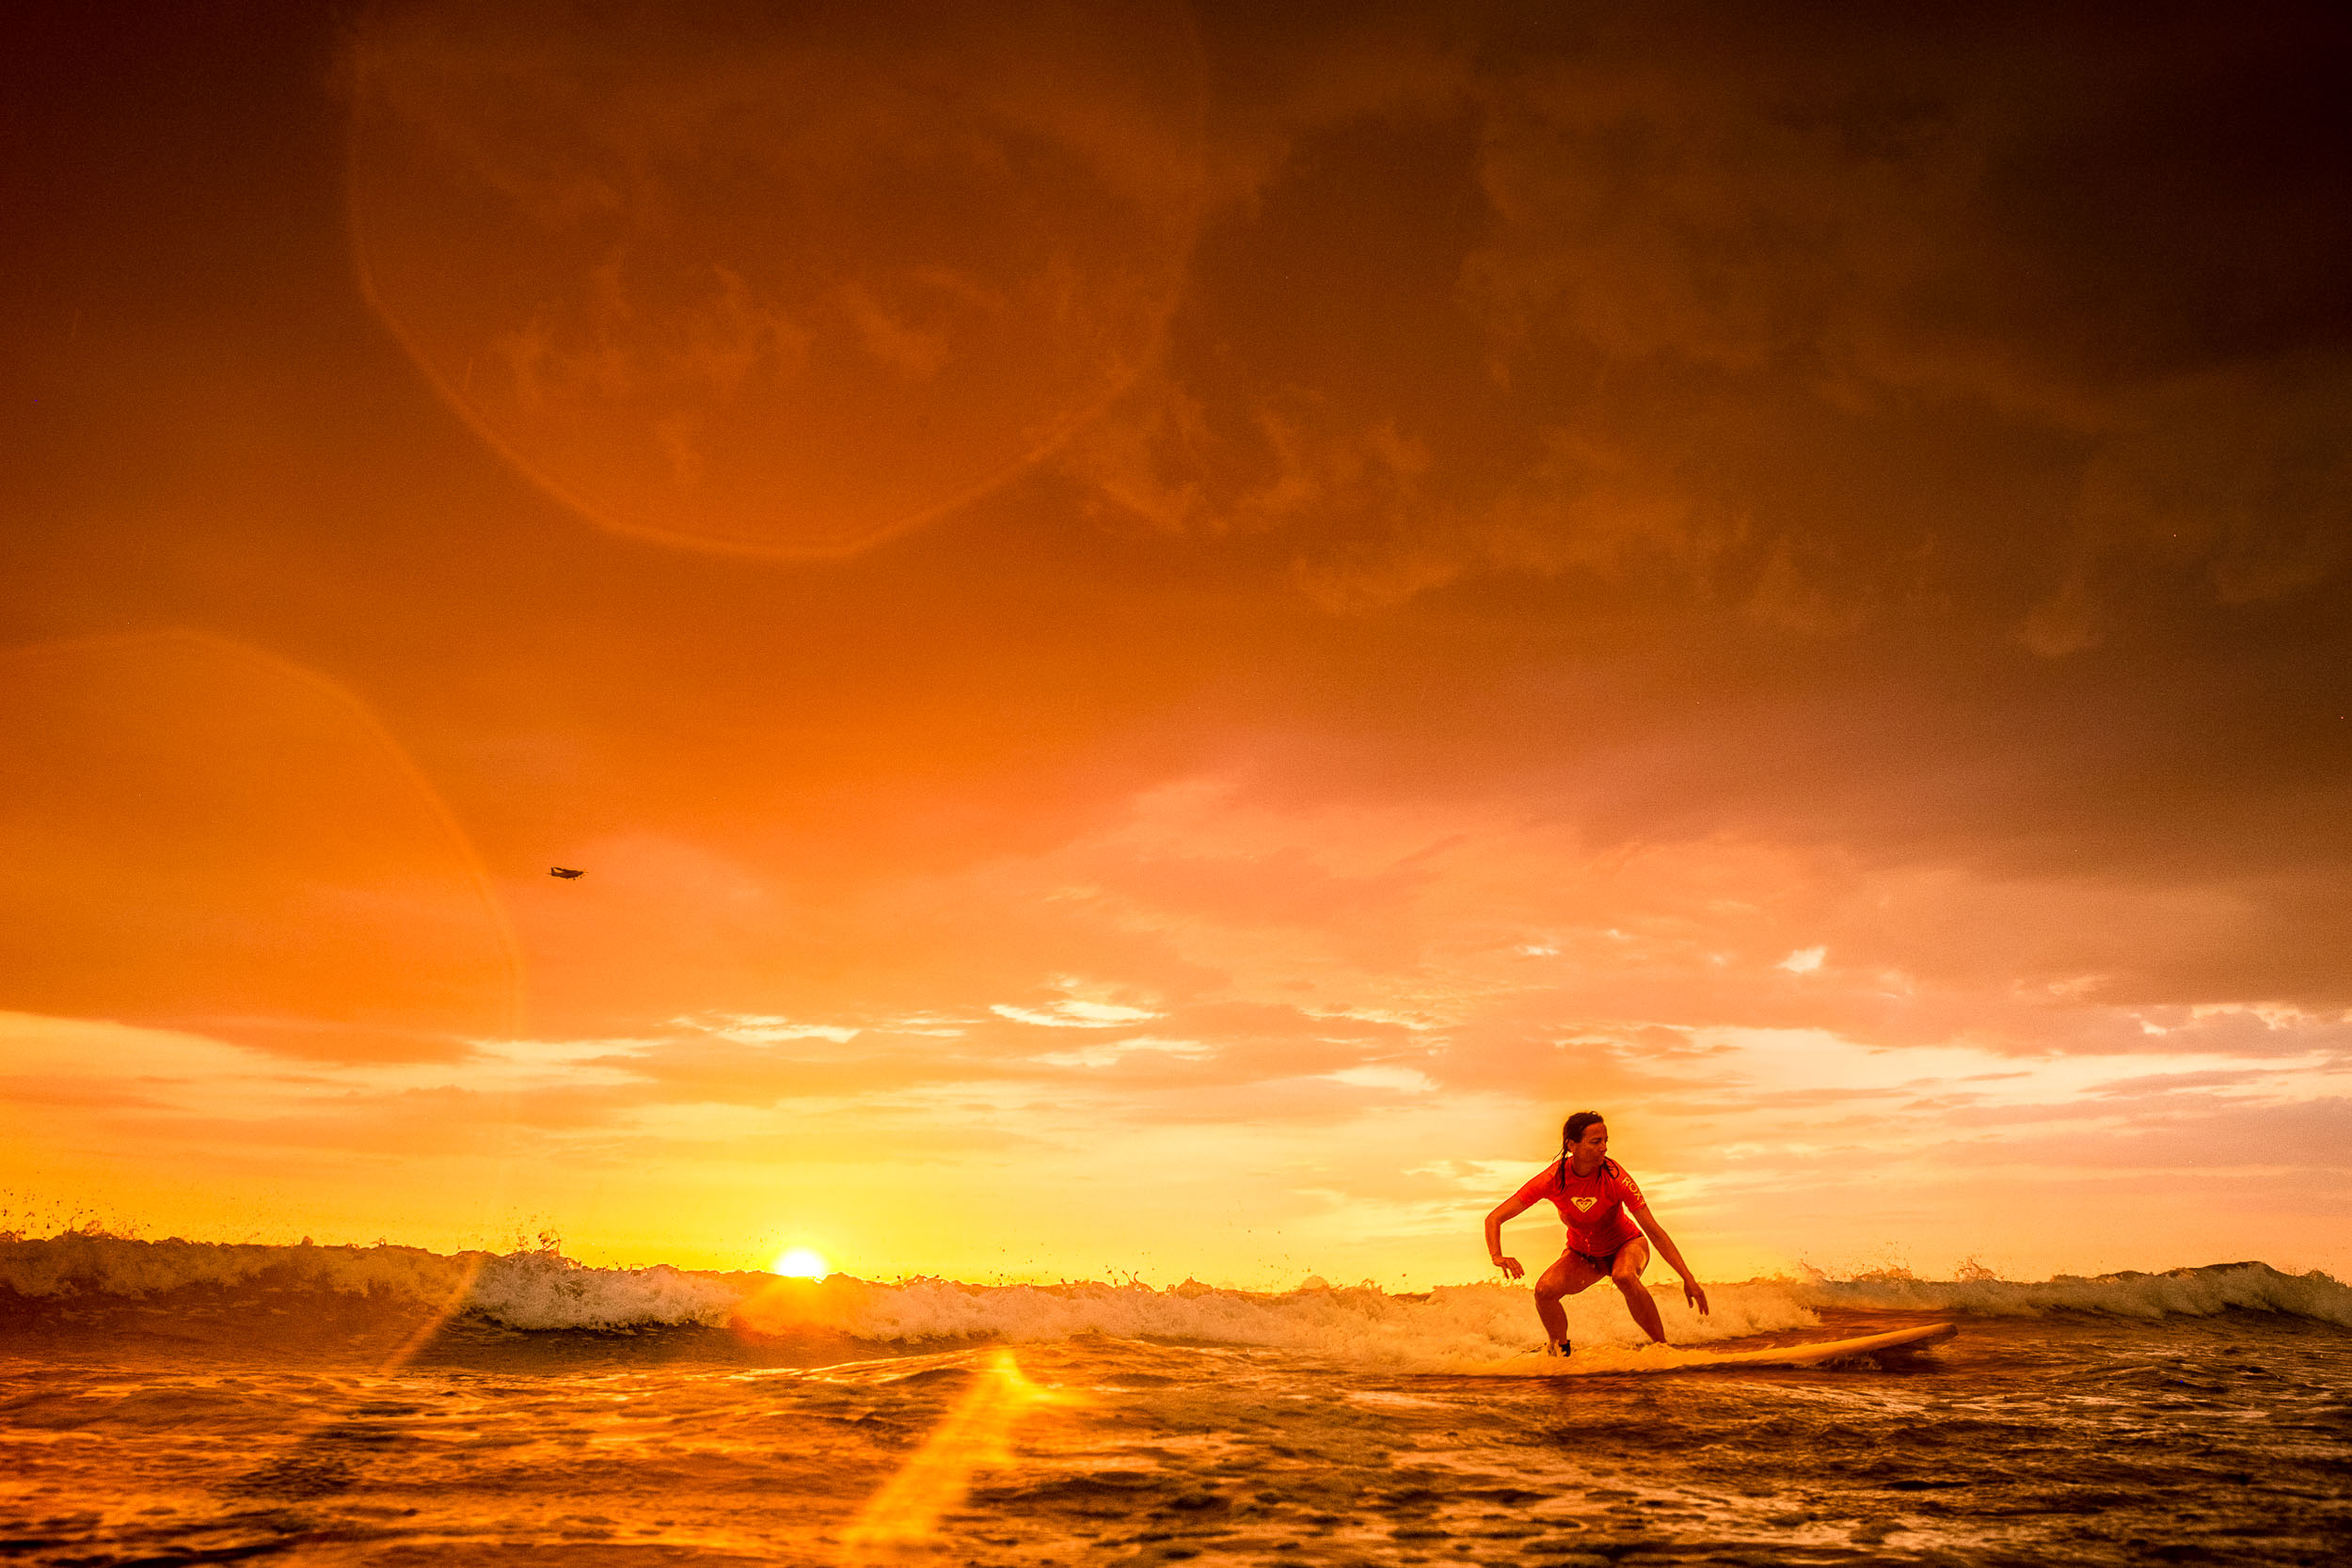 sunset and rain at playa guiones costa rica learn to surf surfer